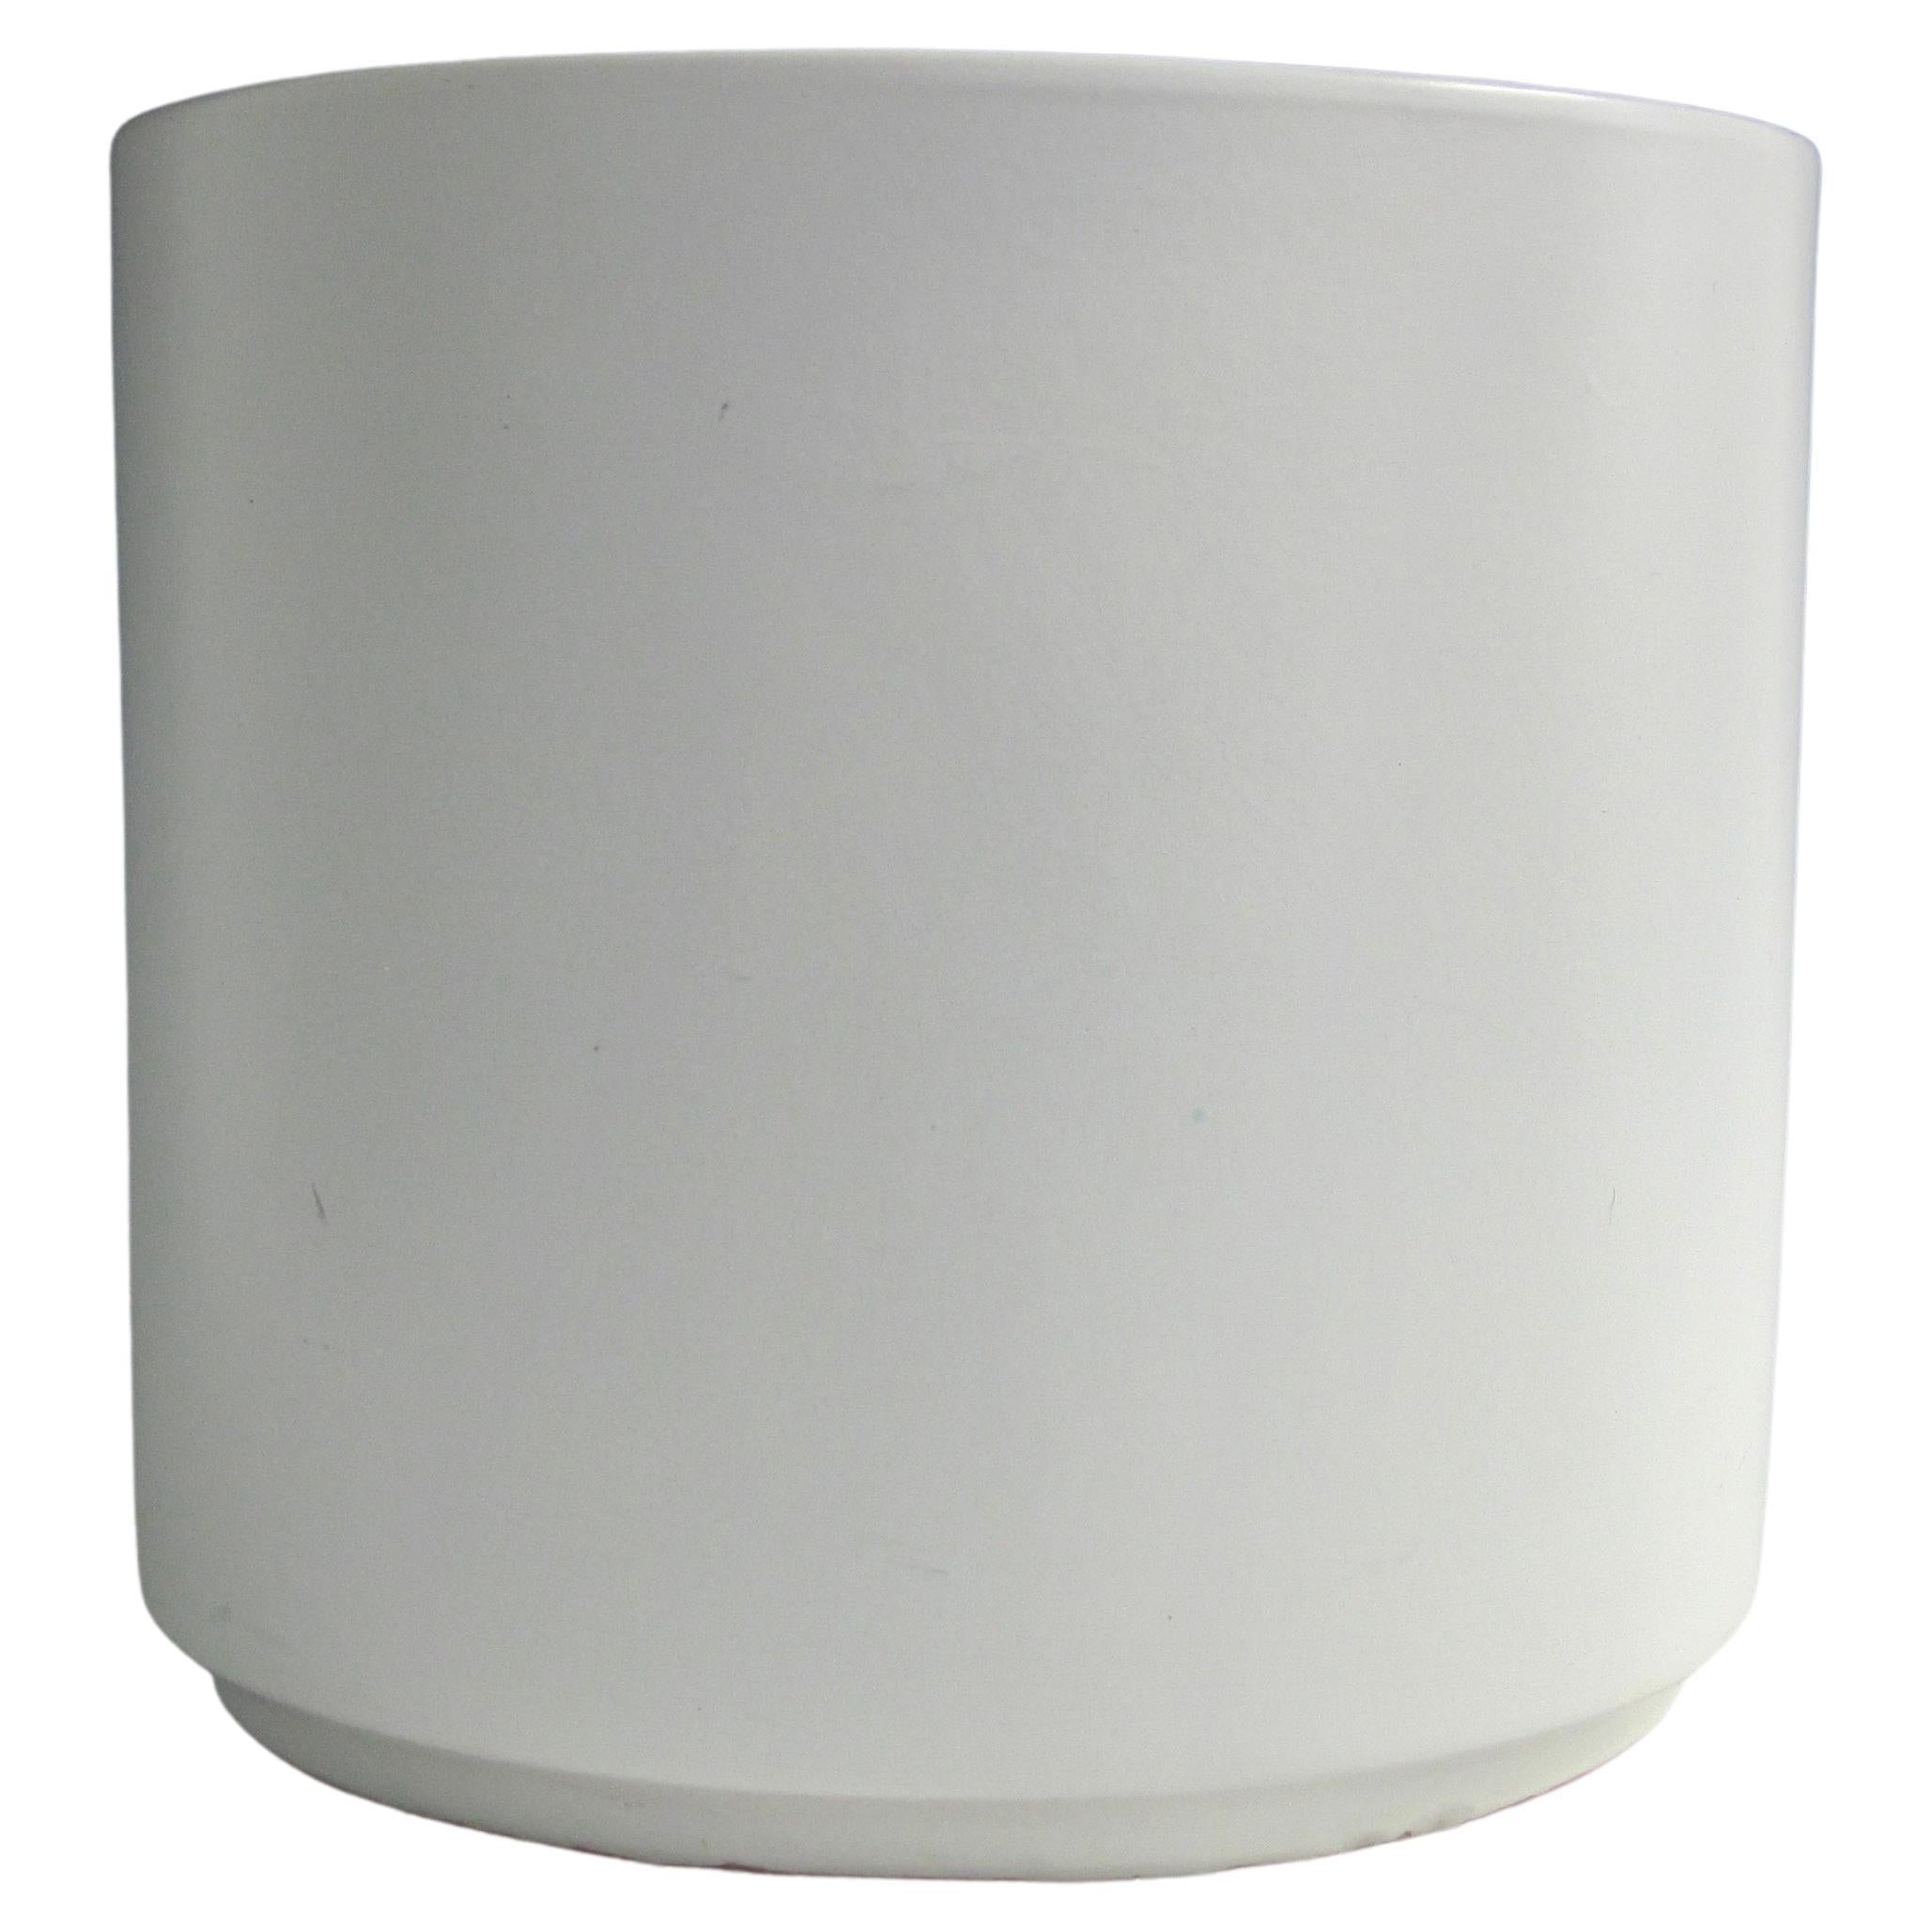 A serene and individual semi-matte white glazed terra cotta planter pot. Minimalist in form with functional use.
Good condition, consistent with age and use.